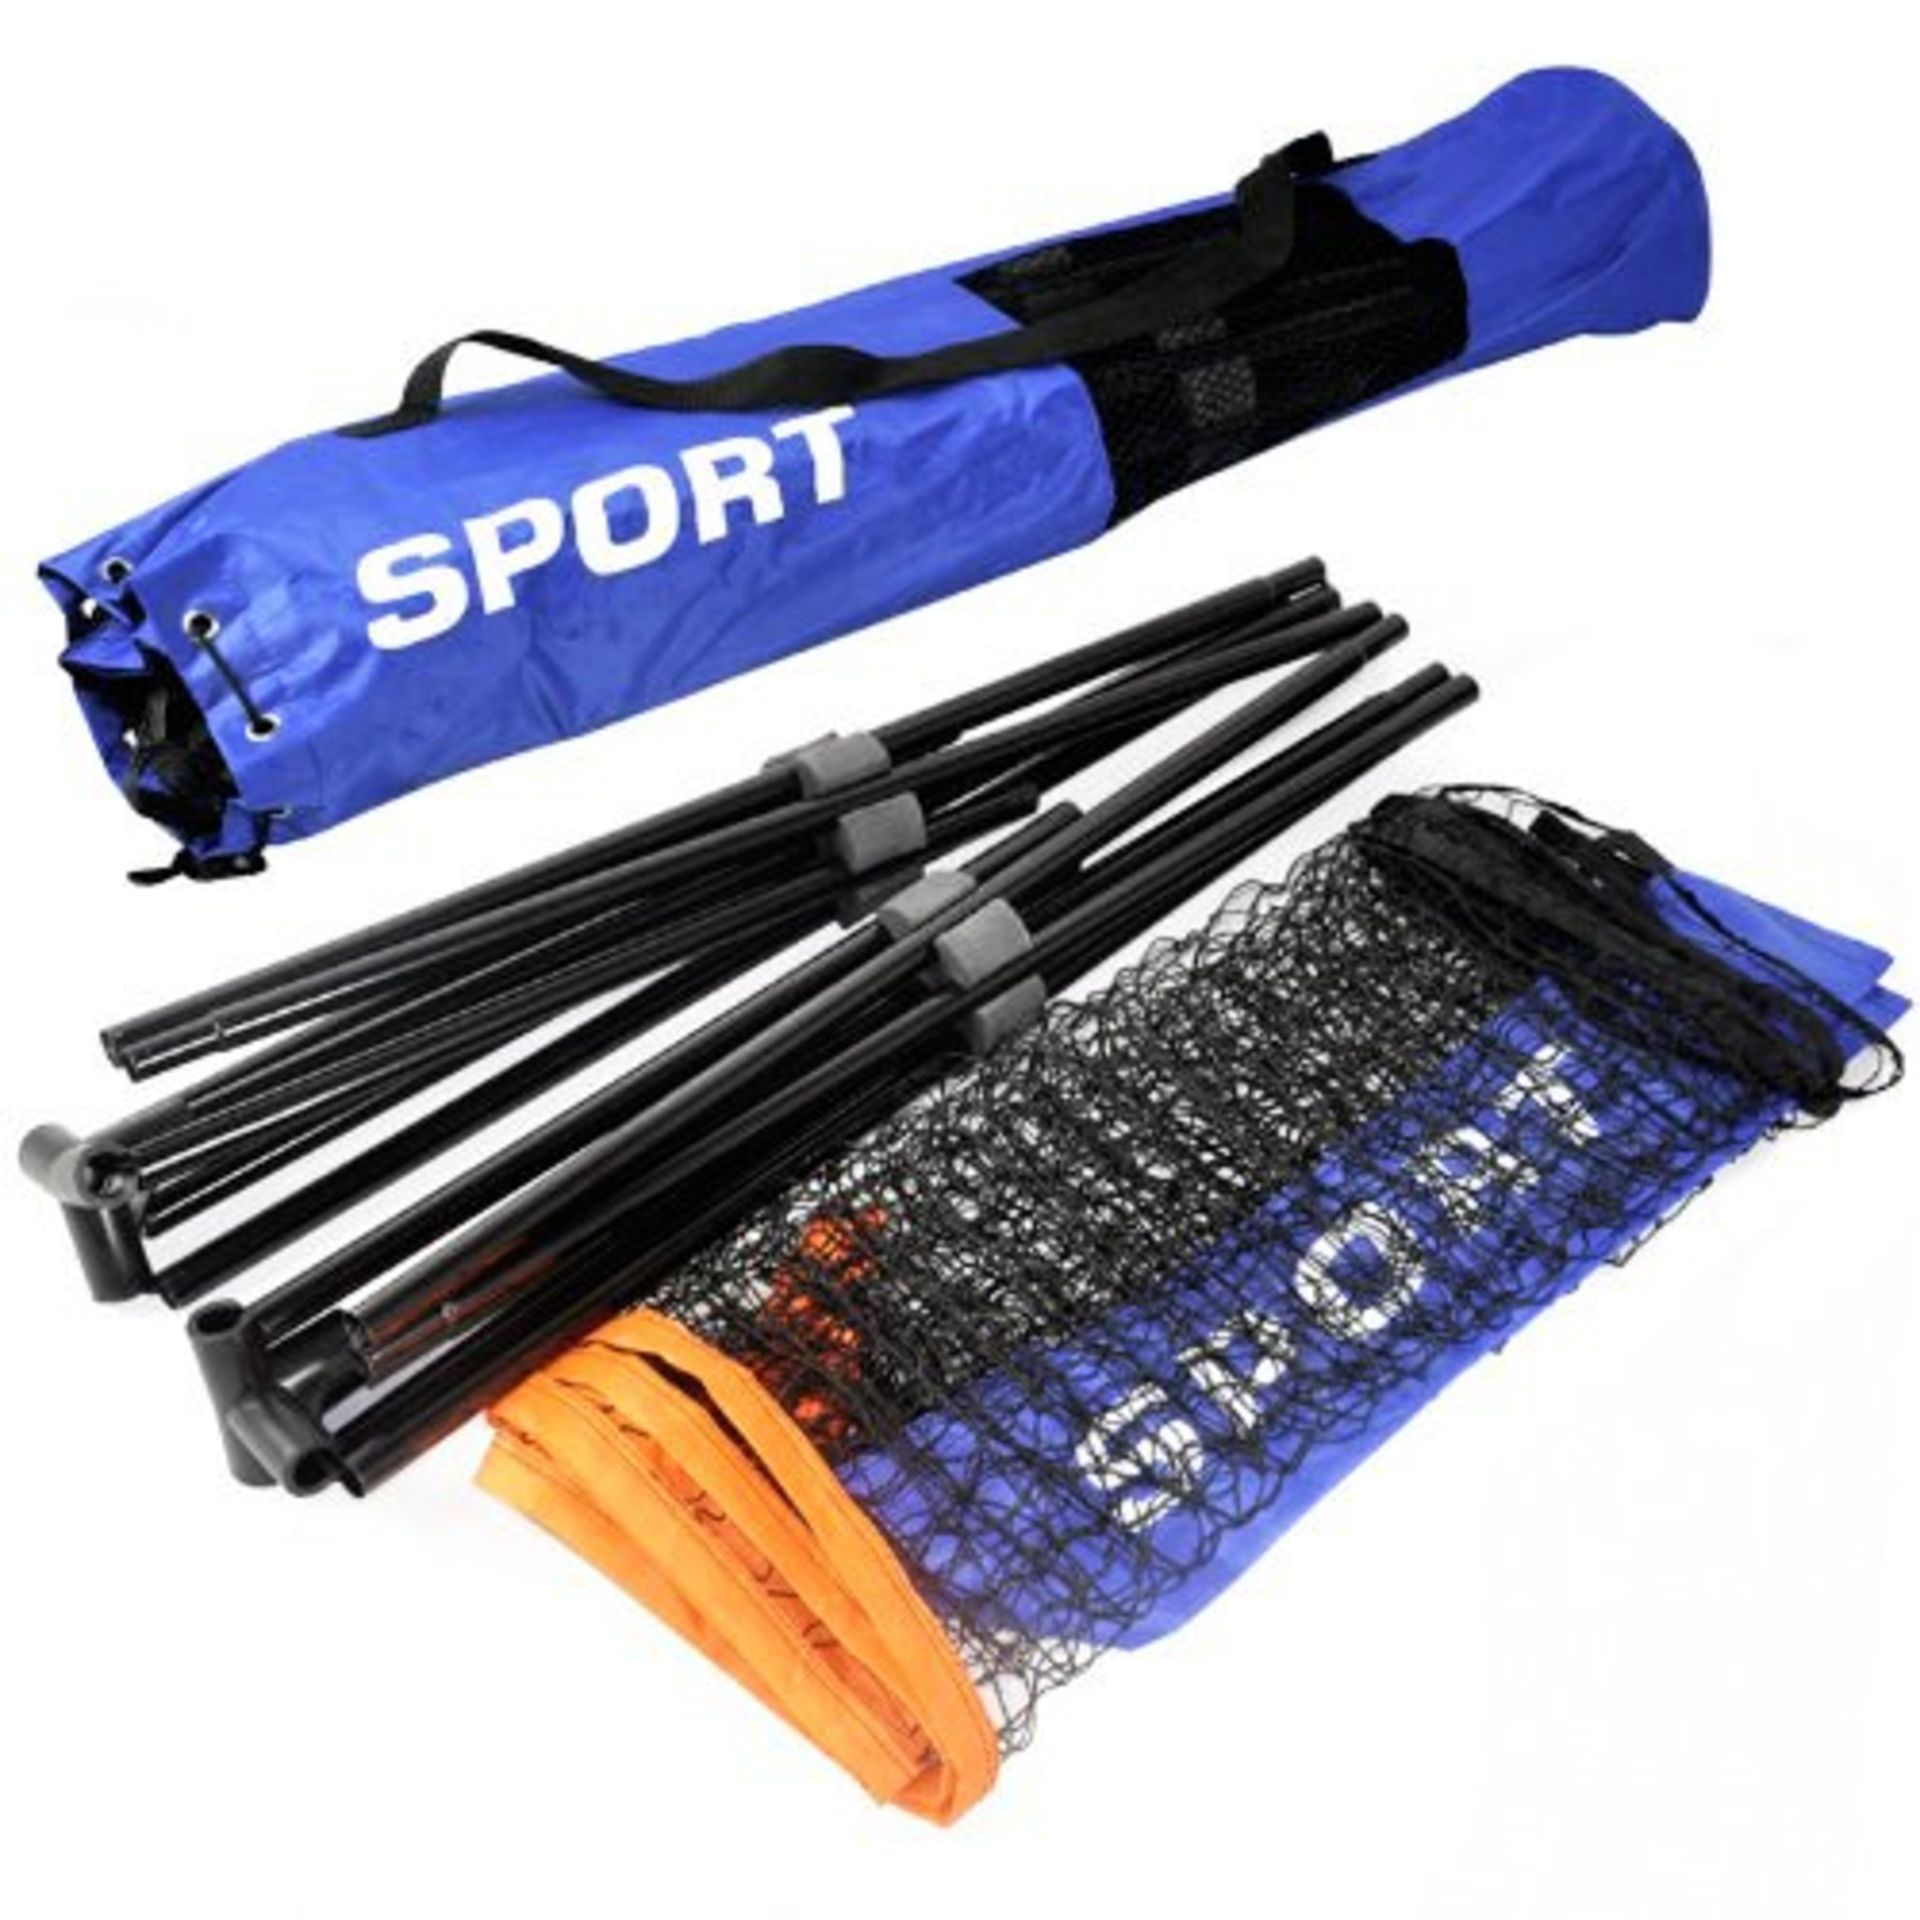 (G12) Large 5m Adjustable Foldable Badminton Tennis Volleyball Net Easy Fold Out Assmbly - F... - Image 3 of 3